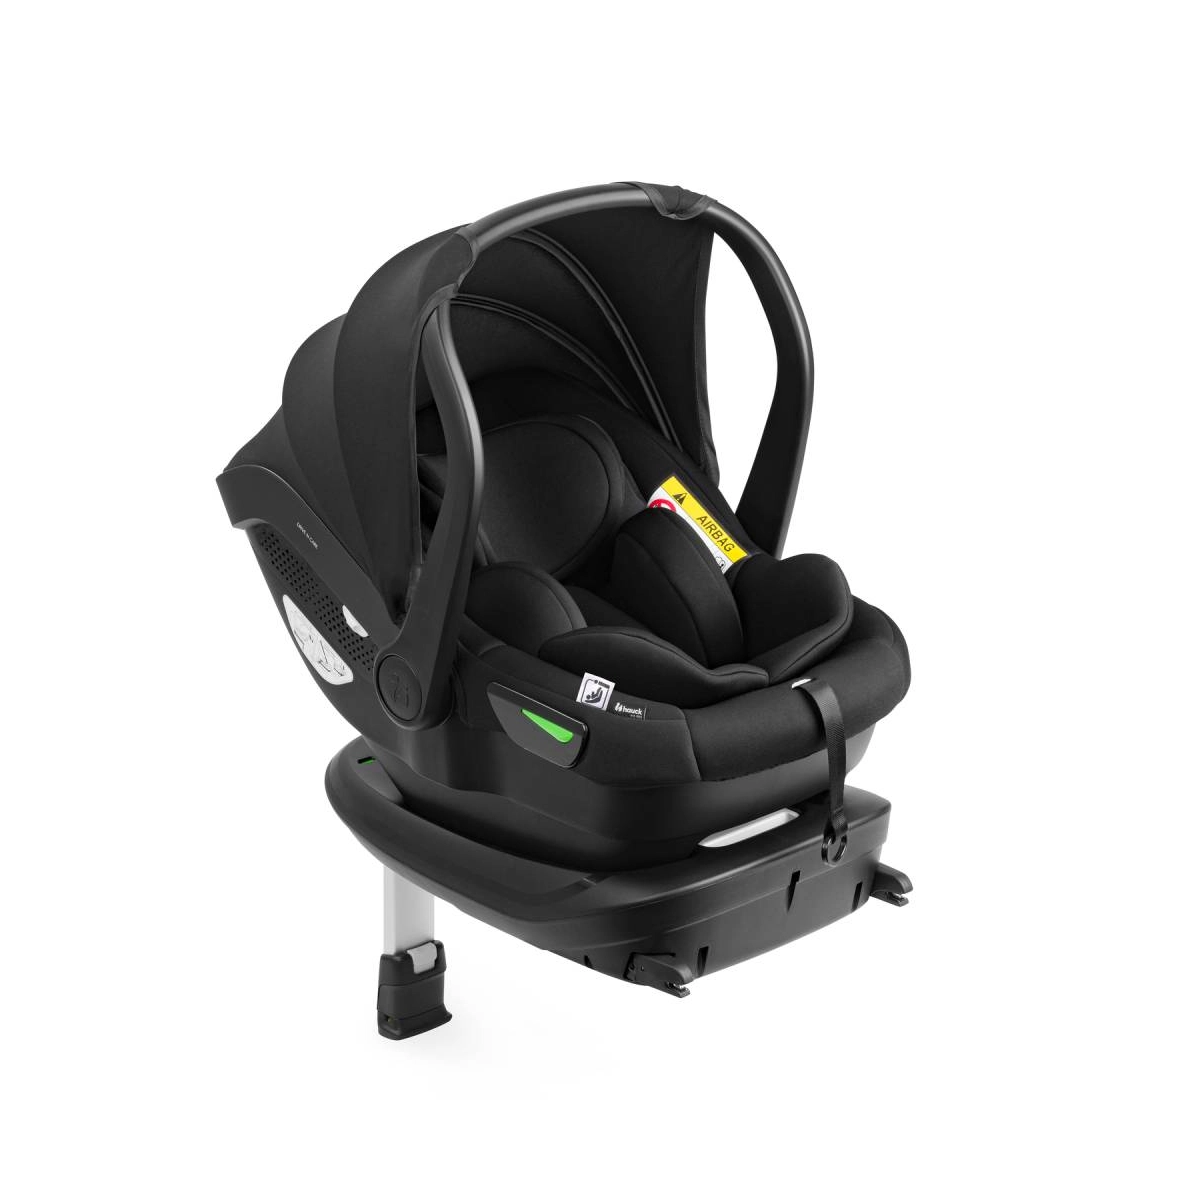 Hauck Drive N Care Infant i-Size Car Seat with Isofix Base